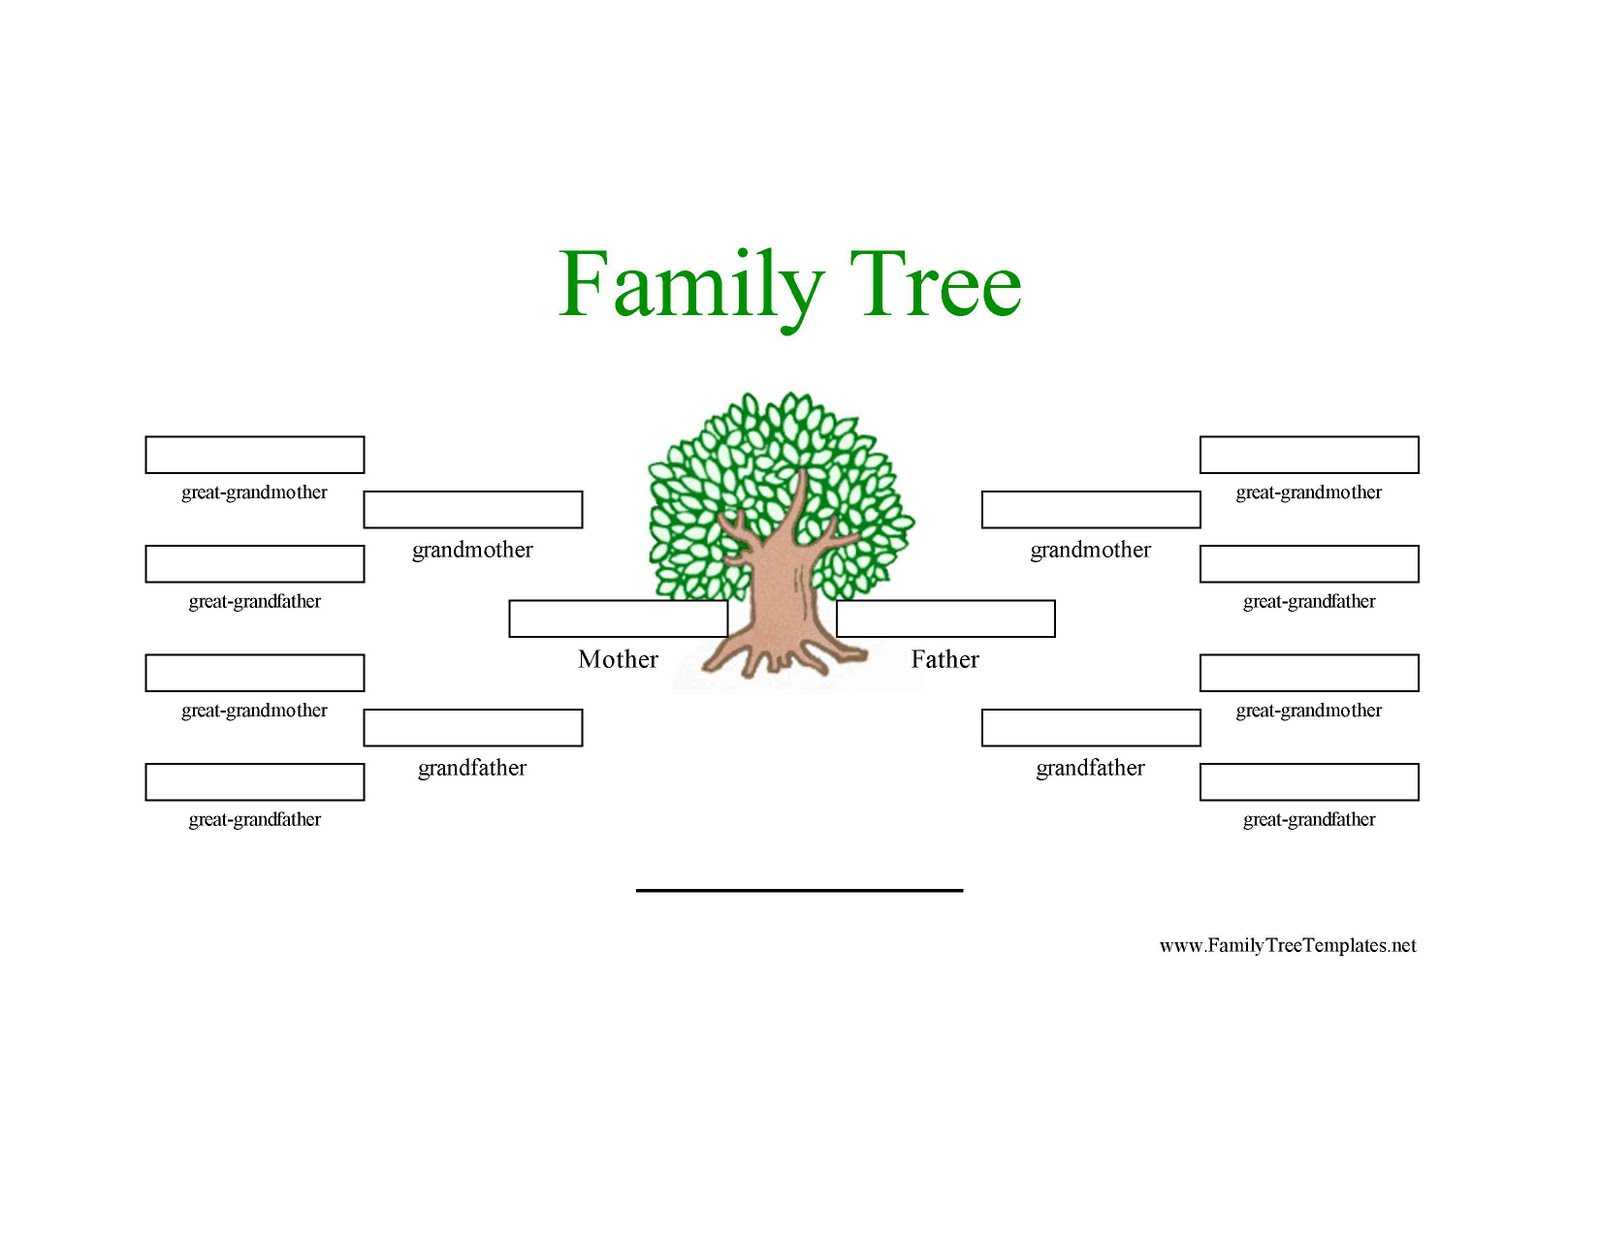 Family Tree Template: Family Tree Template Three Generation Intended For Blank Family Tree Template 3 Generations